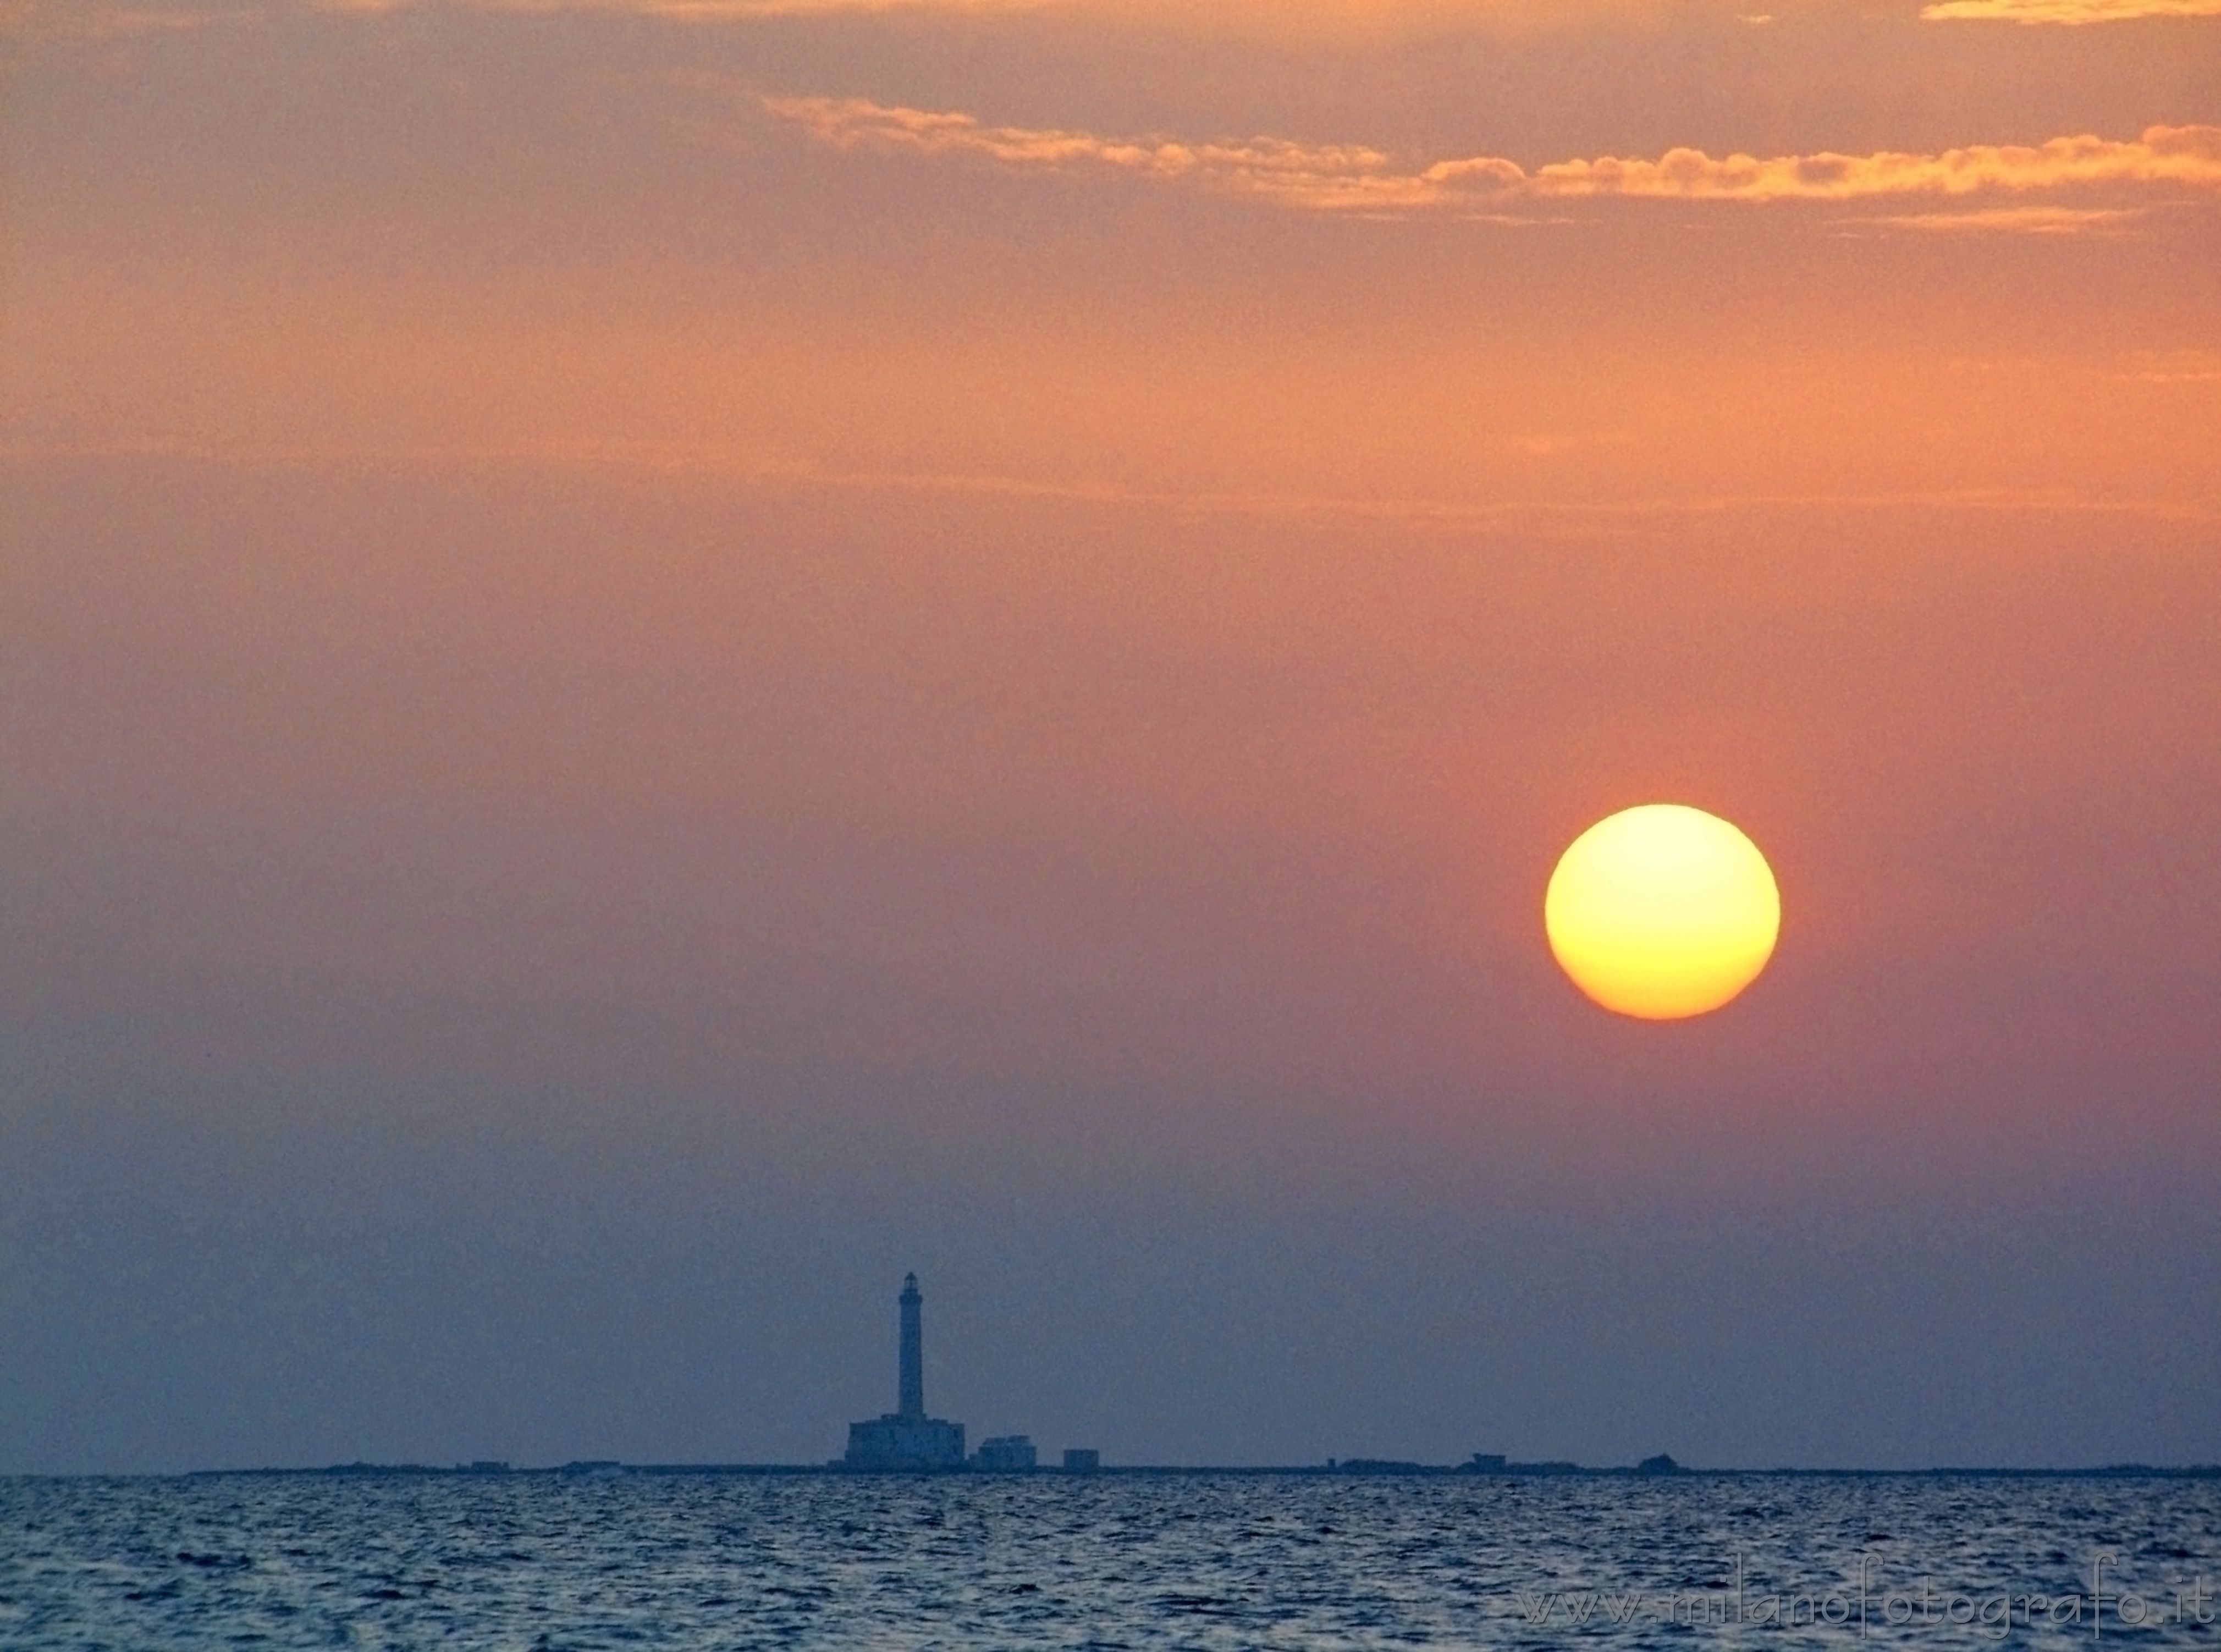 Baia Verde (Gallipoli, Lecce, Italy): Sunset with Sant Andrea Island - Baia Verde (Gallipoli, Lecce, Italy)